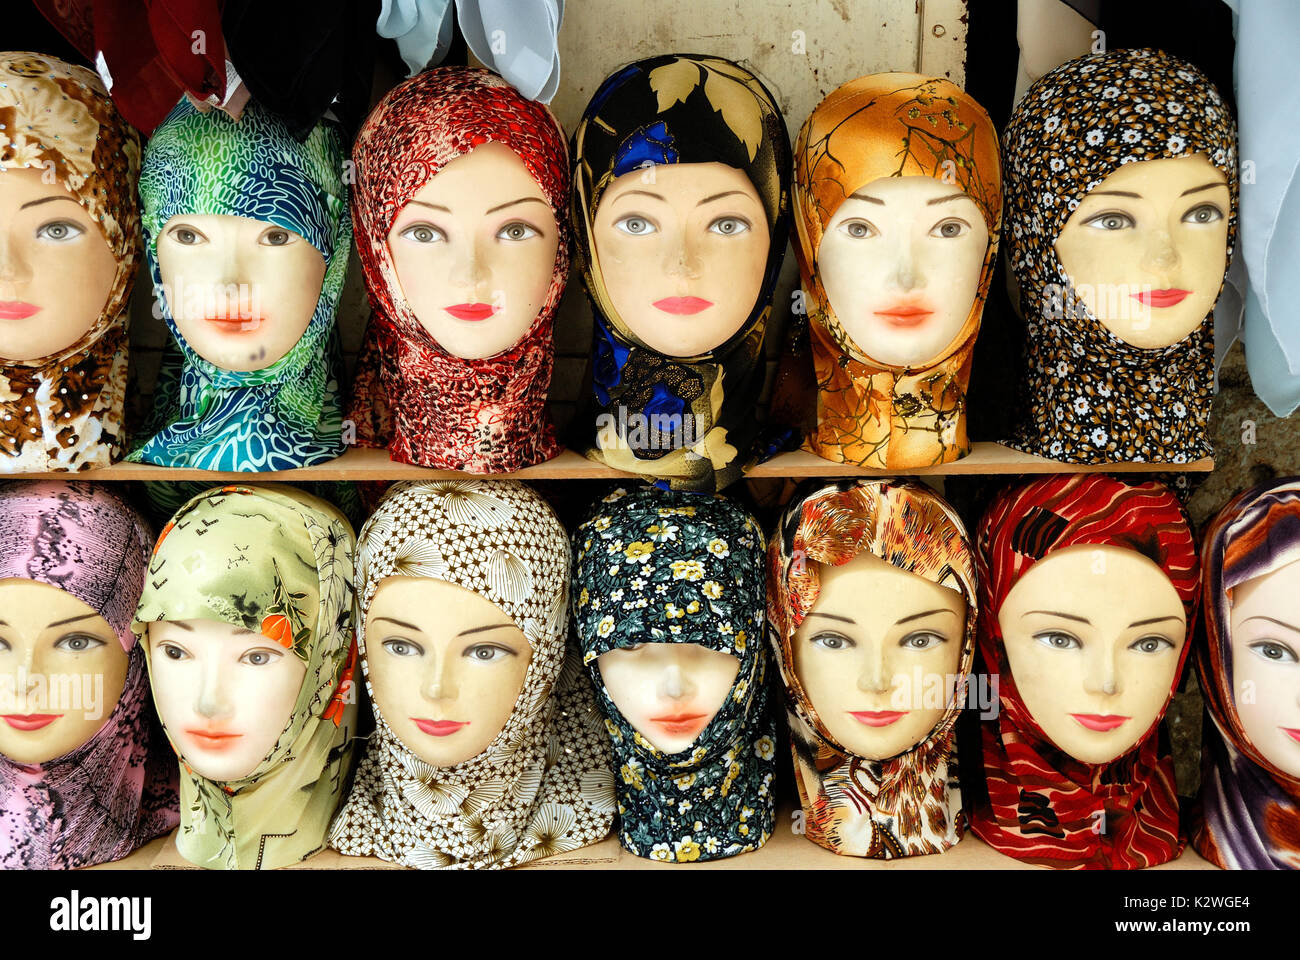 Mannequins with assortment of Muslim headscarfs for sale. Jerusalem, Israel Stock Photo